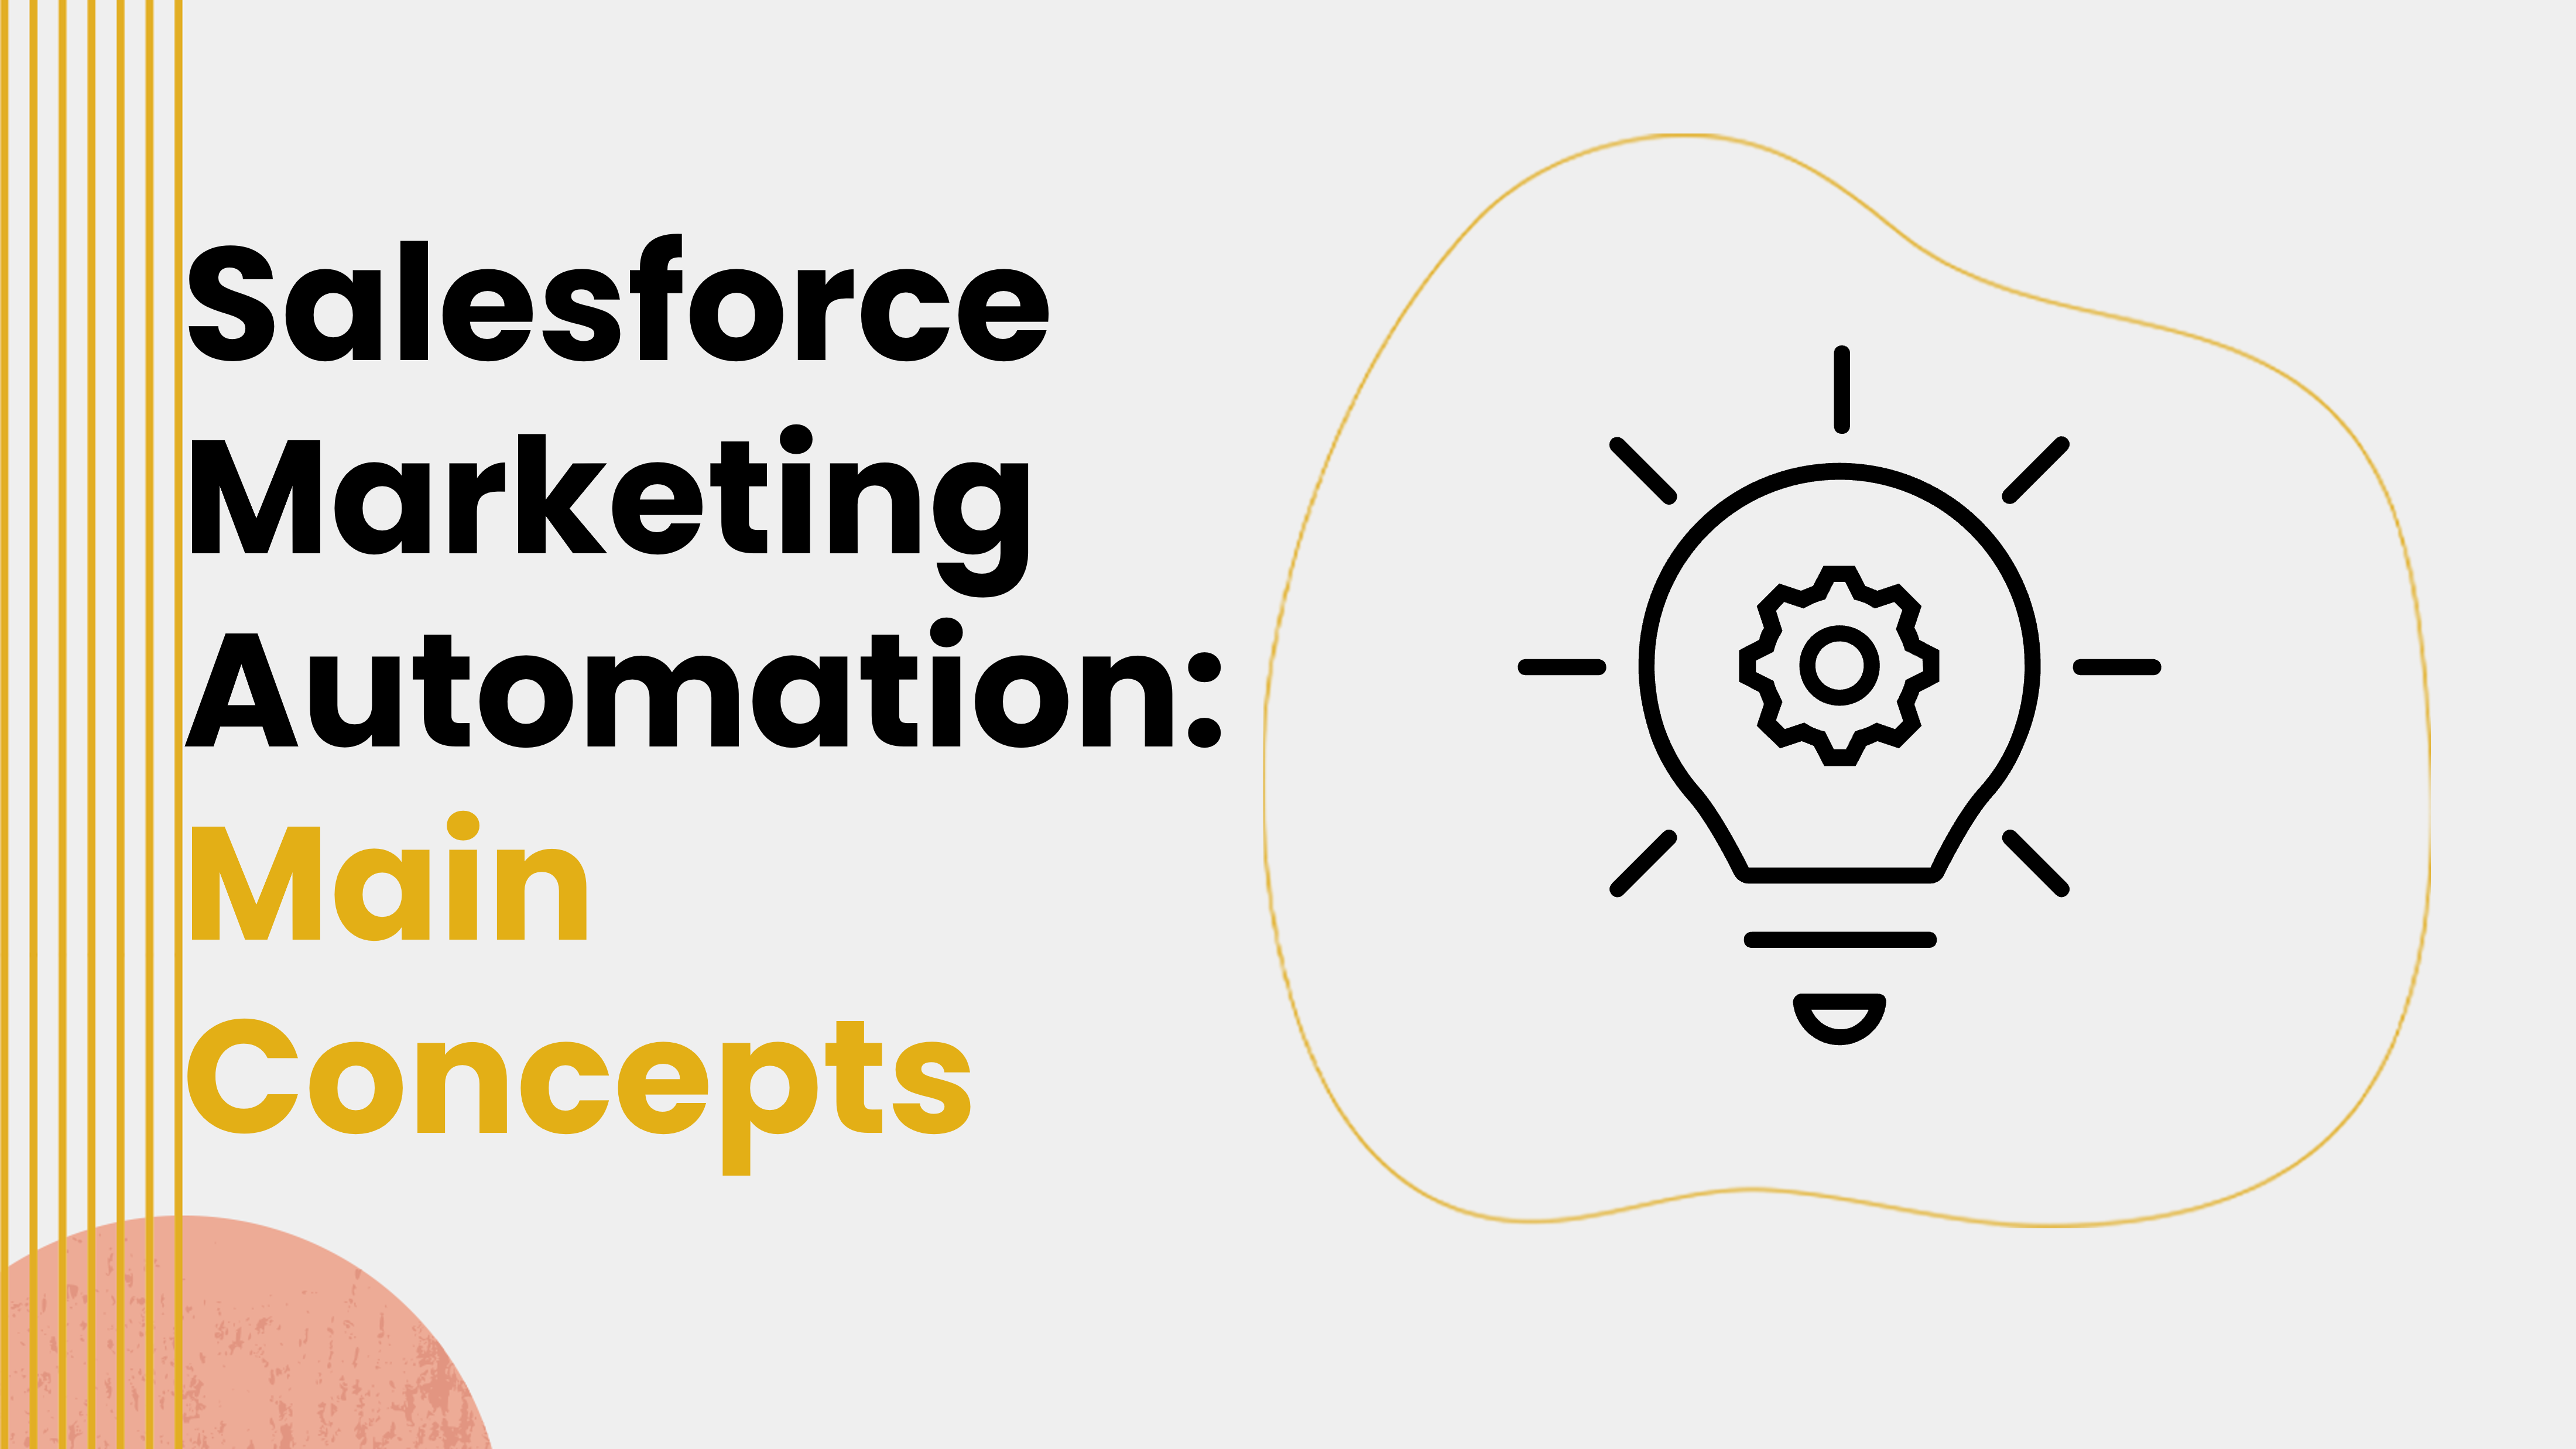 Salesforce Marketing Automation: Main Concepts - AGS